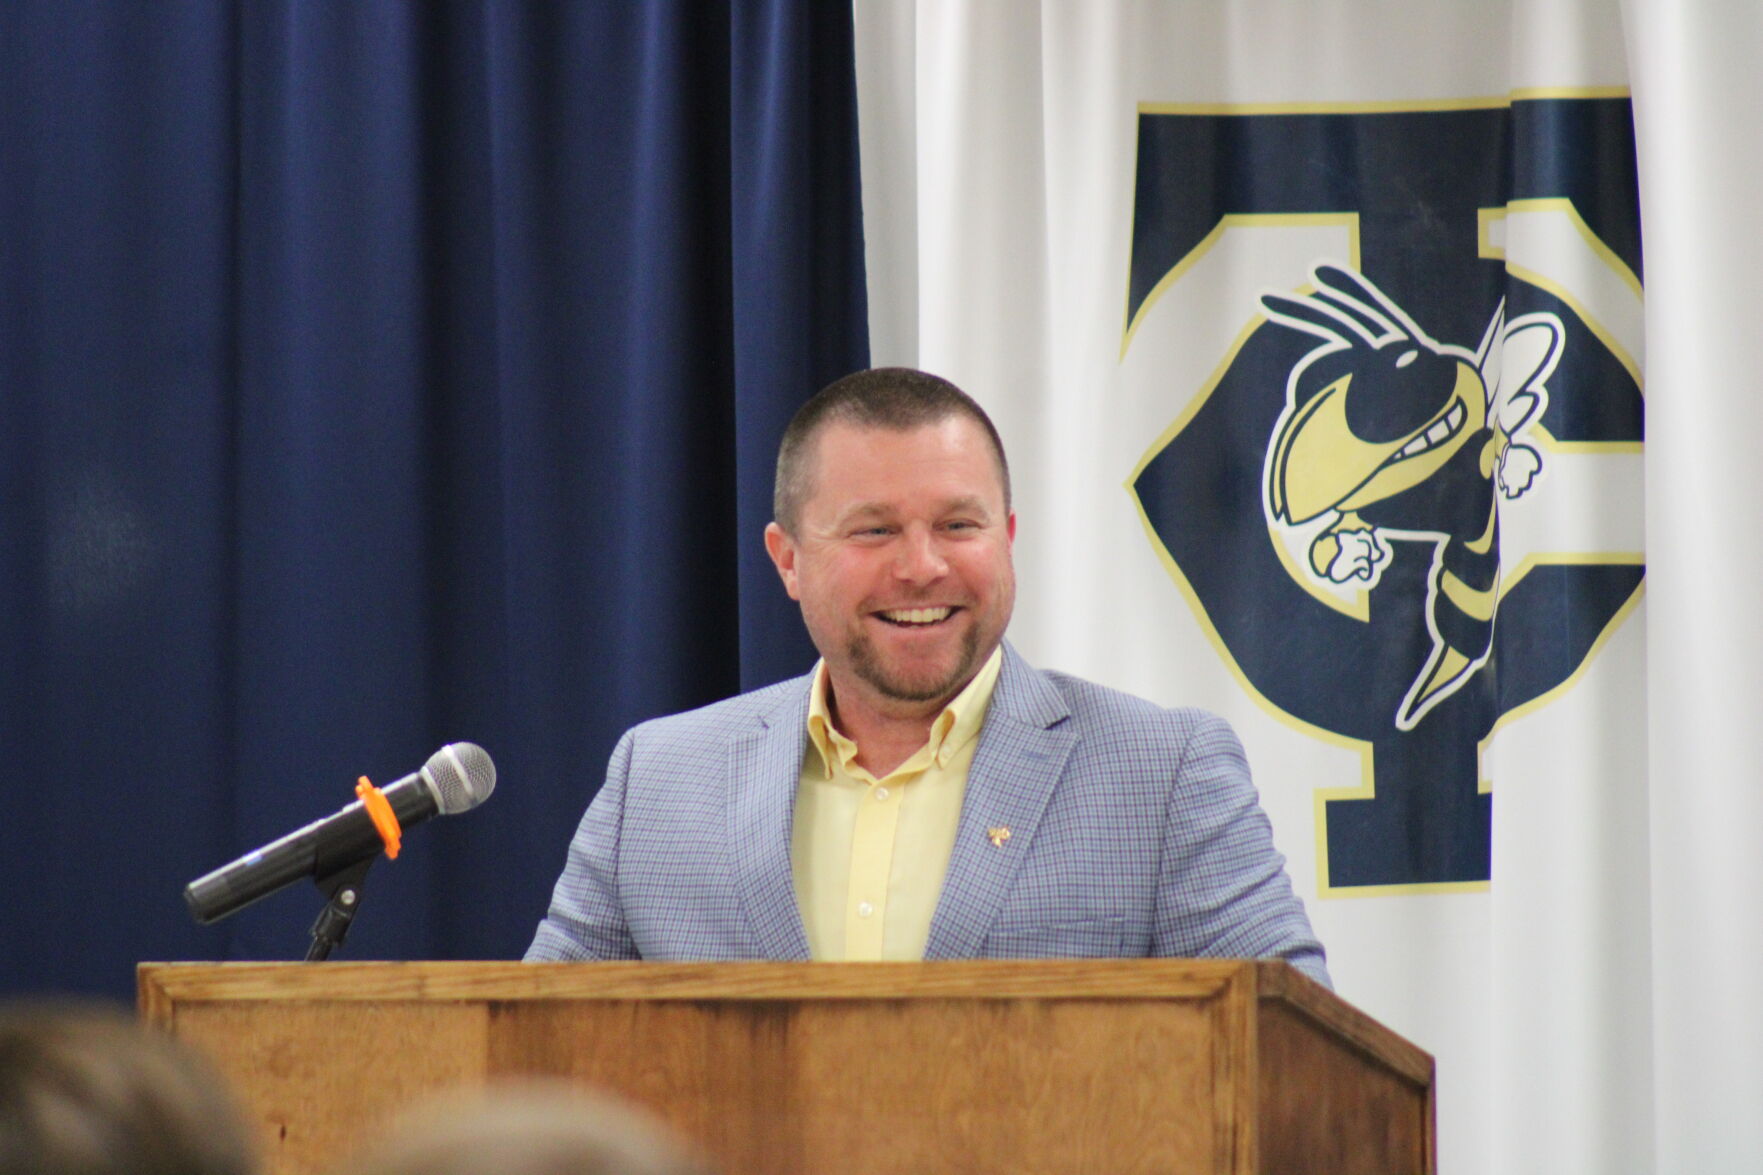 Ryan Strickland Named as Colquitt County’s New Baseball Coach | Coaching Success and Achievements